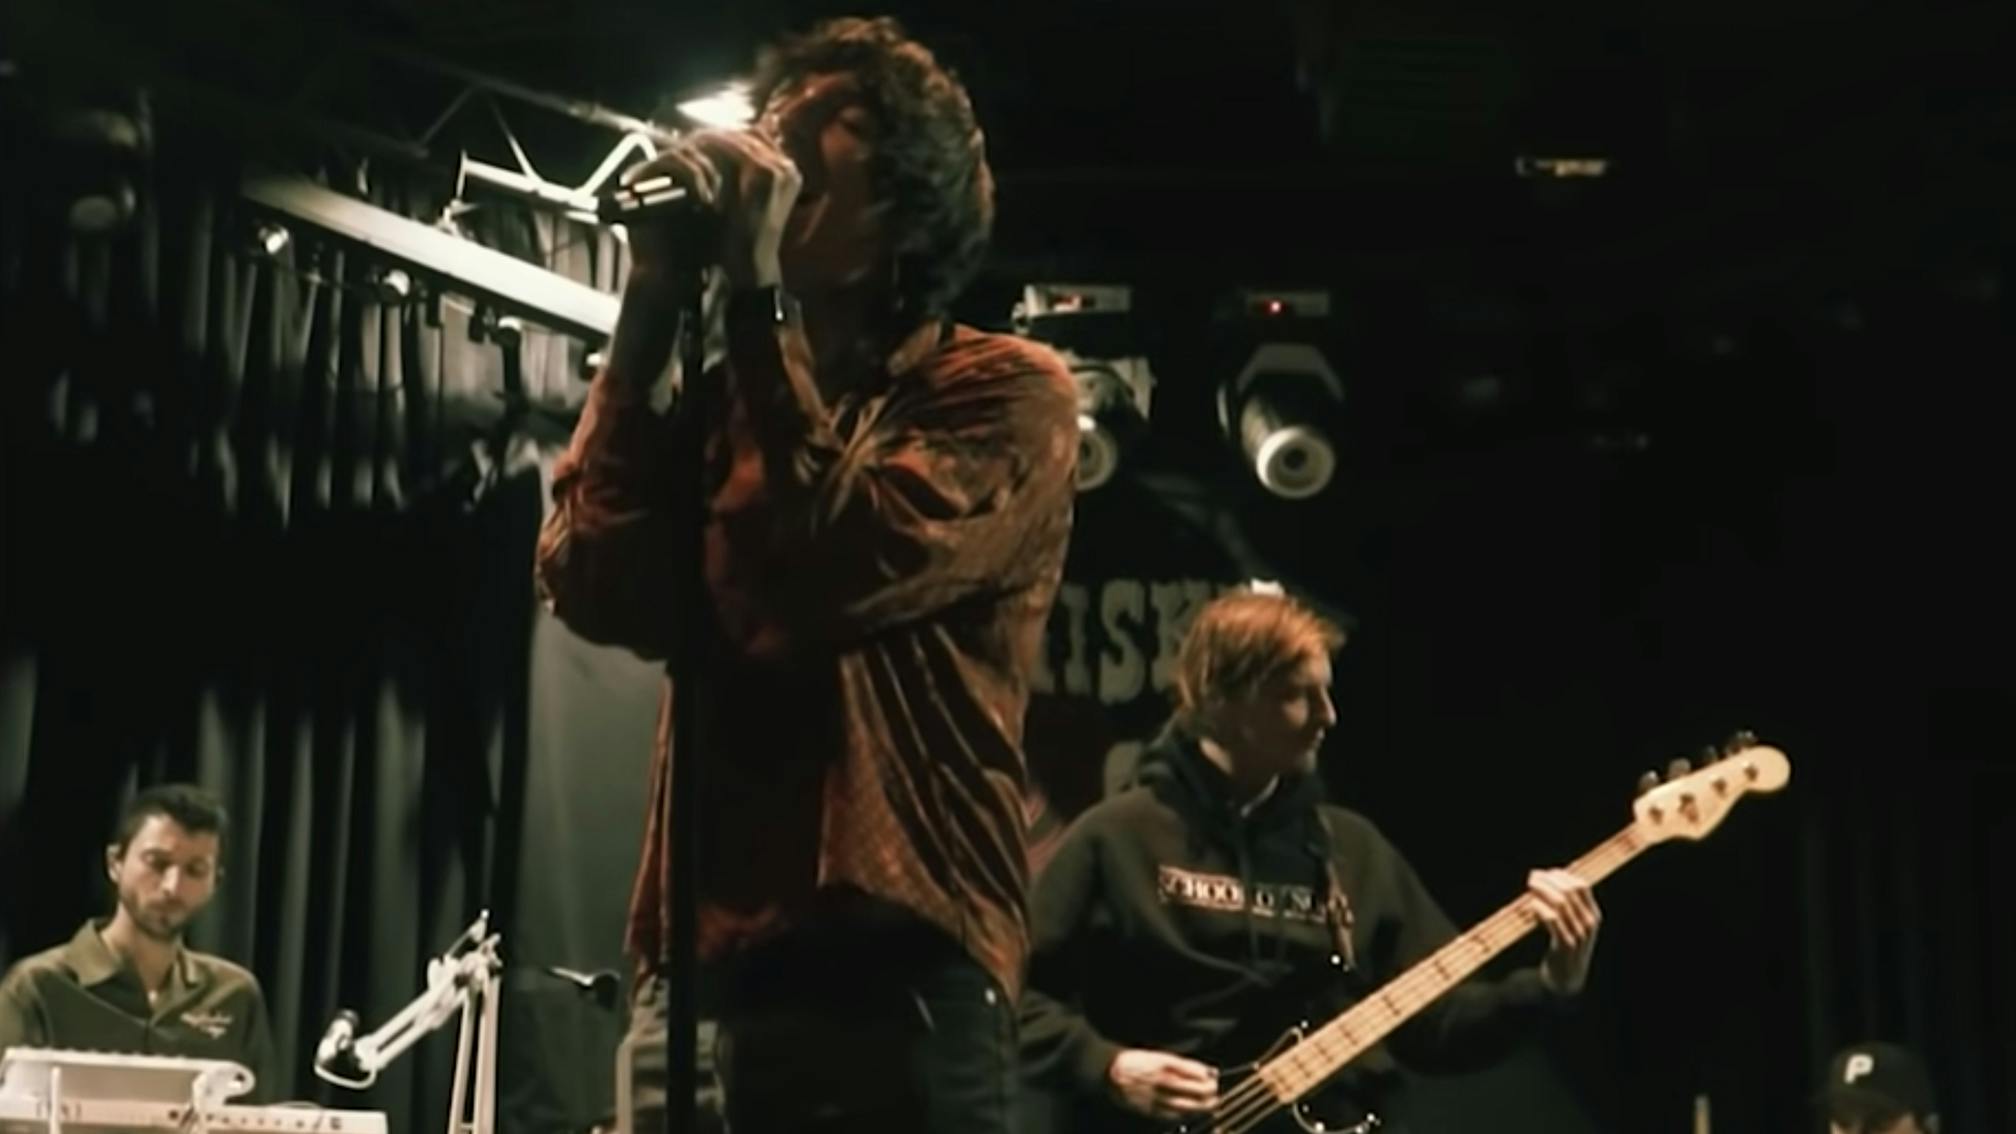 See Bring Me The Horizon rehearse for their tiny Whisky show